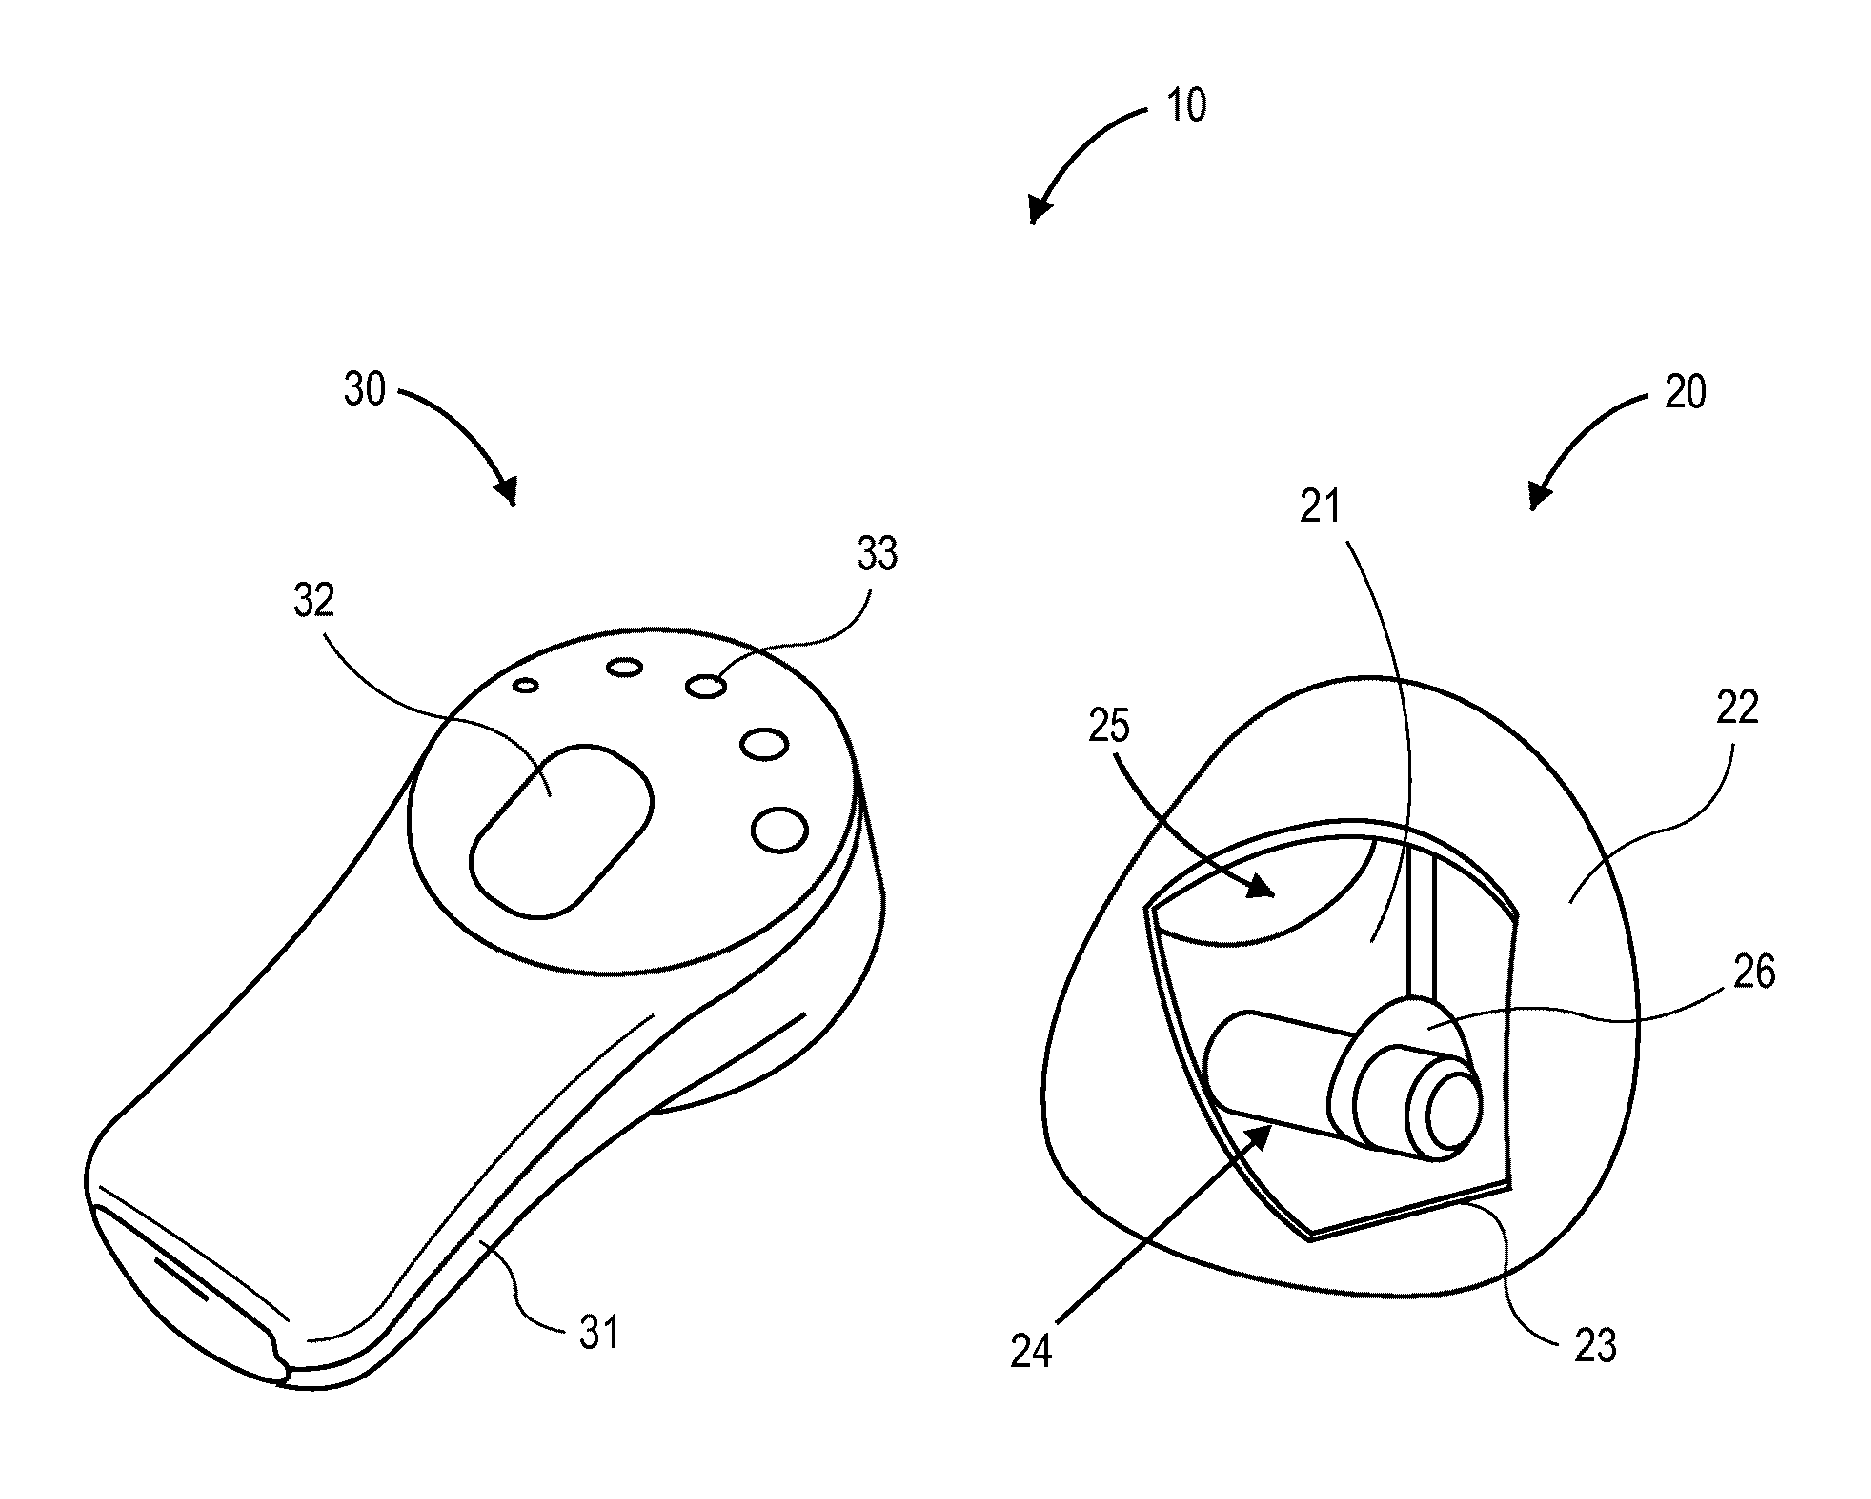 Tissue expanders, implants, and methods of use